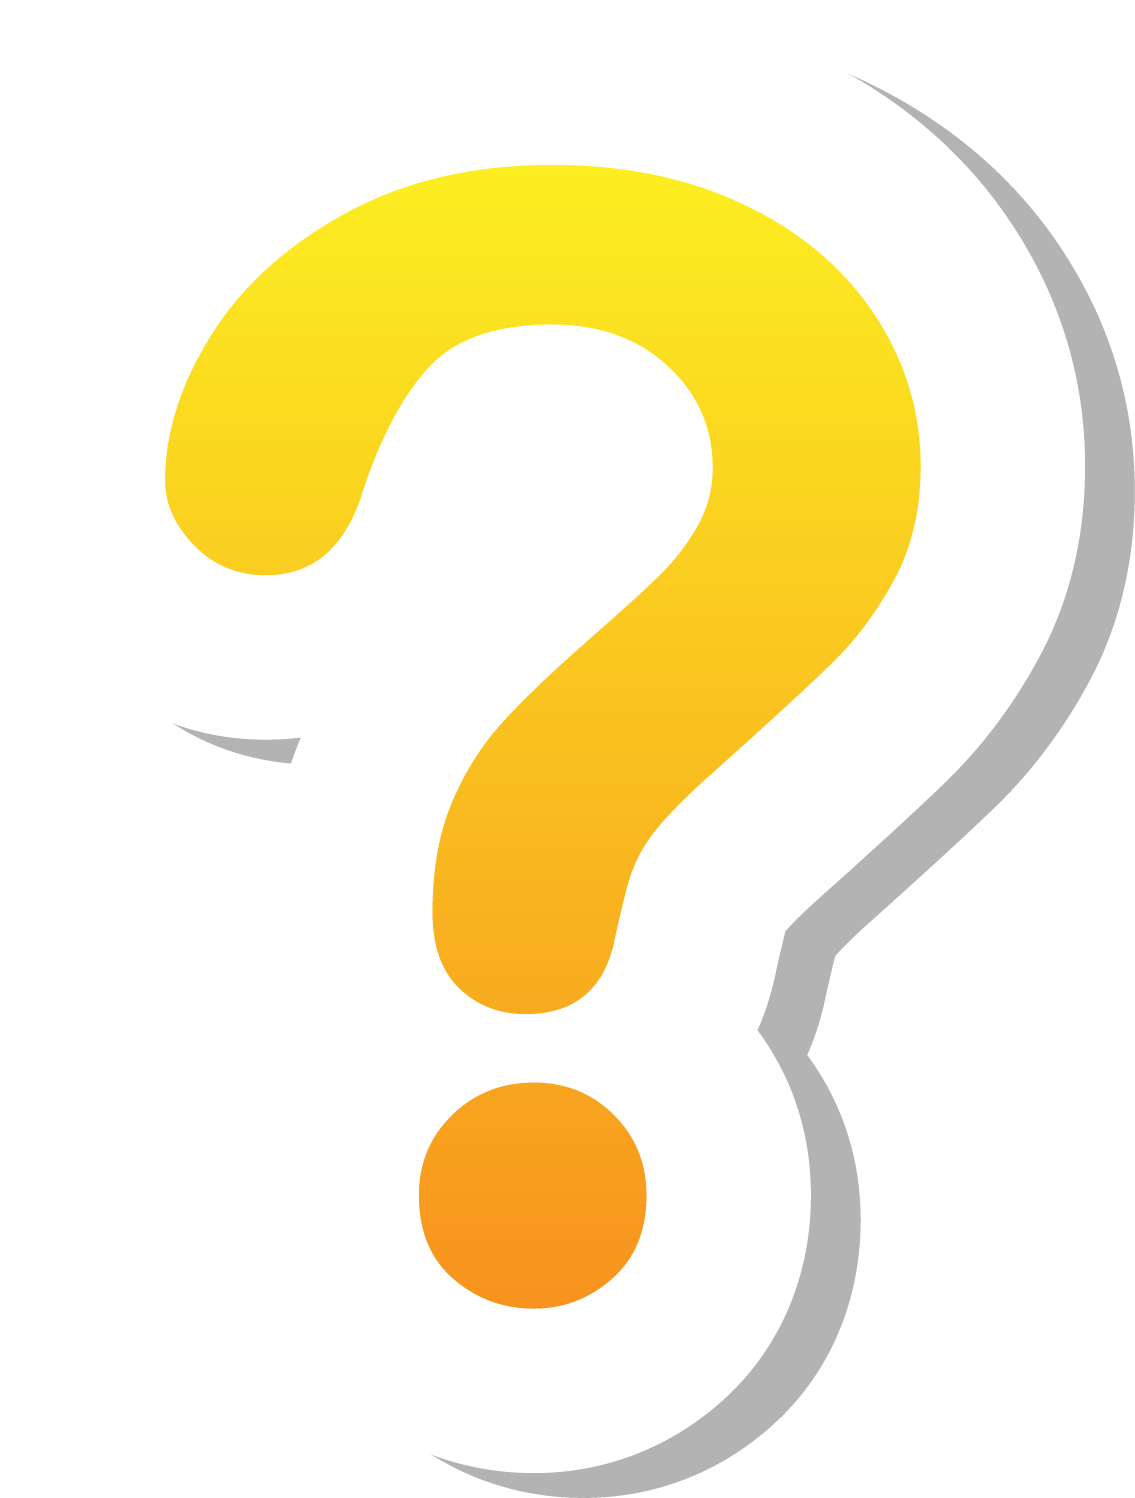 Text Symbol Question Encapsulated Yellow Mark Postscript PNG Image